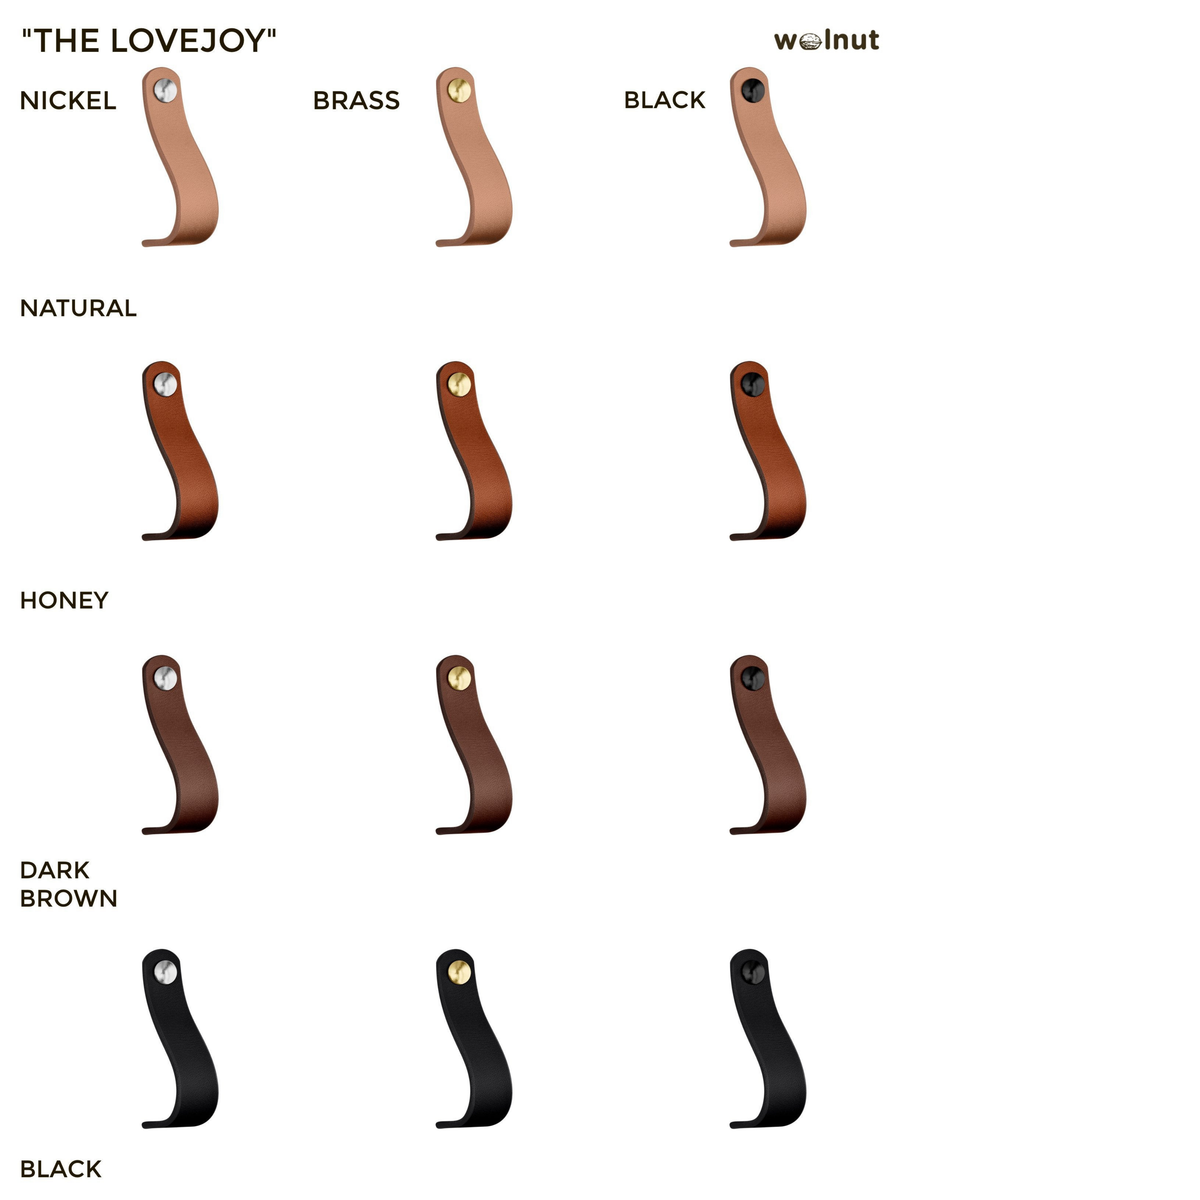 Photo collage showing all variants of the Lovejoy leather cabinet handle: four leather colors, three metal finishes